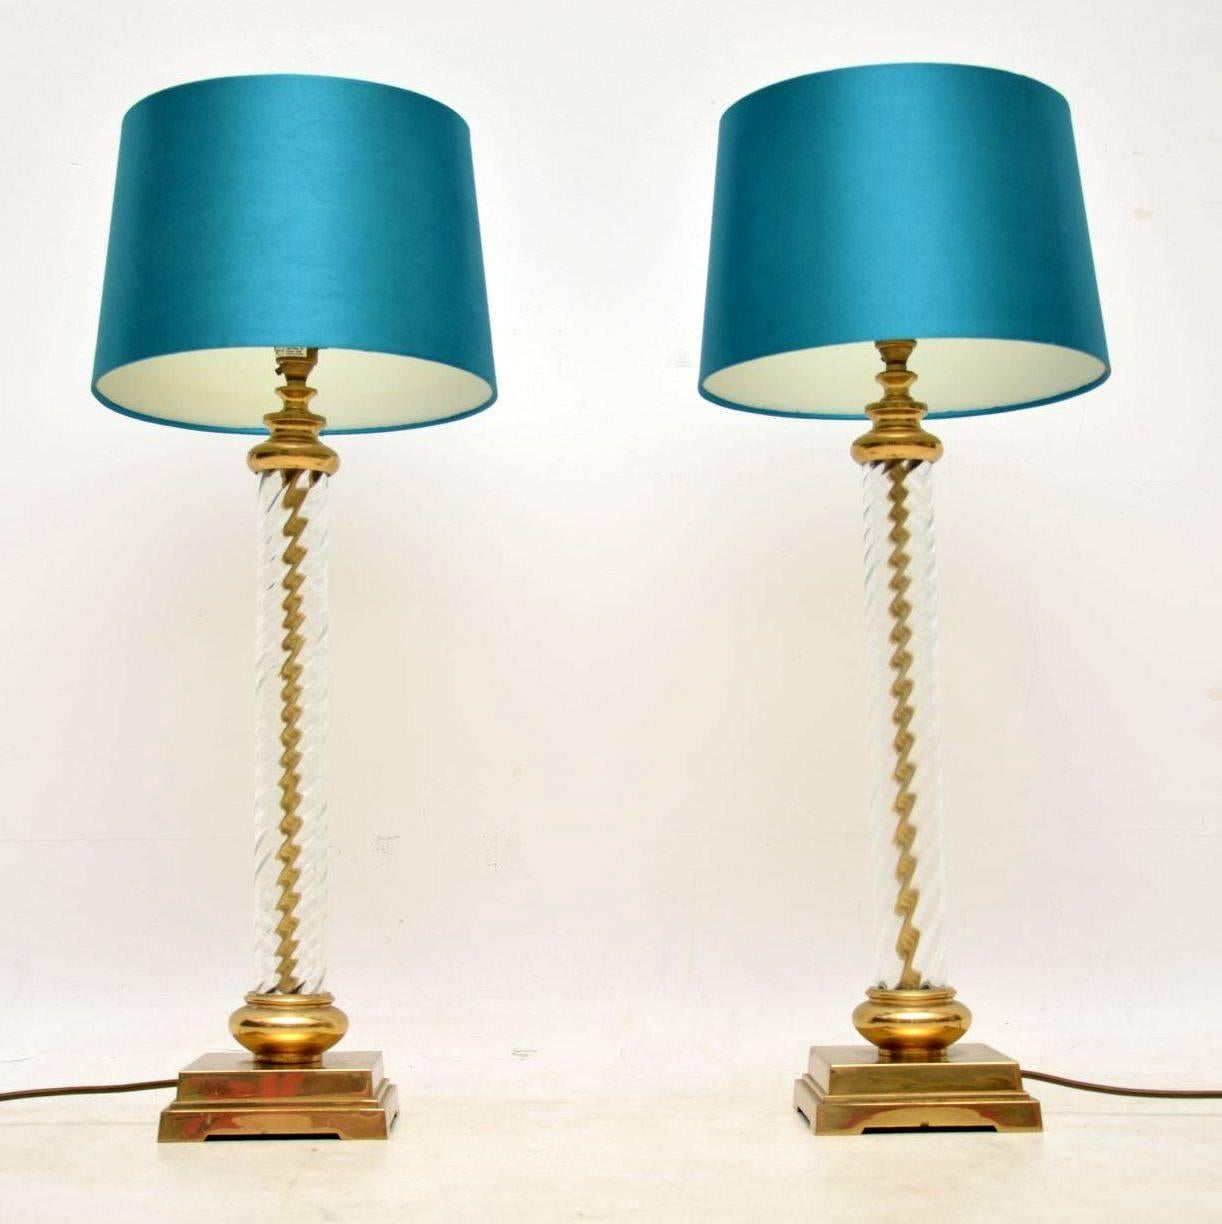 An absolutely stunning pair of vintage table lamps from the 1960s, these are in excellent condition for their age with only some minor wear here and there. They sit on brass bases, have a brass vertical column encased in swirling glass, with a brass